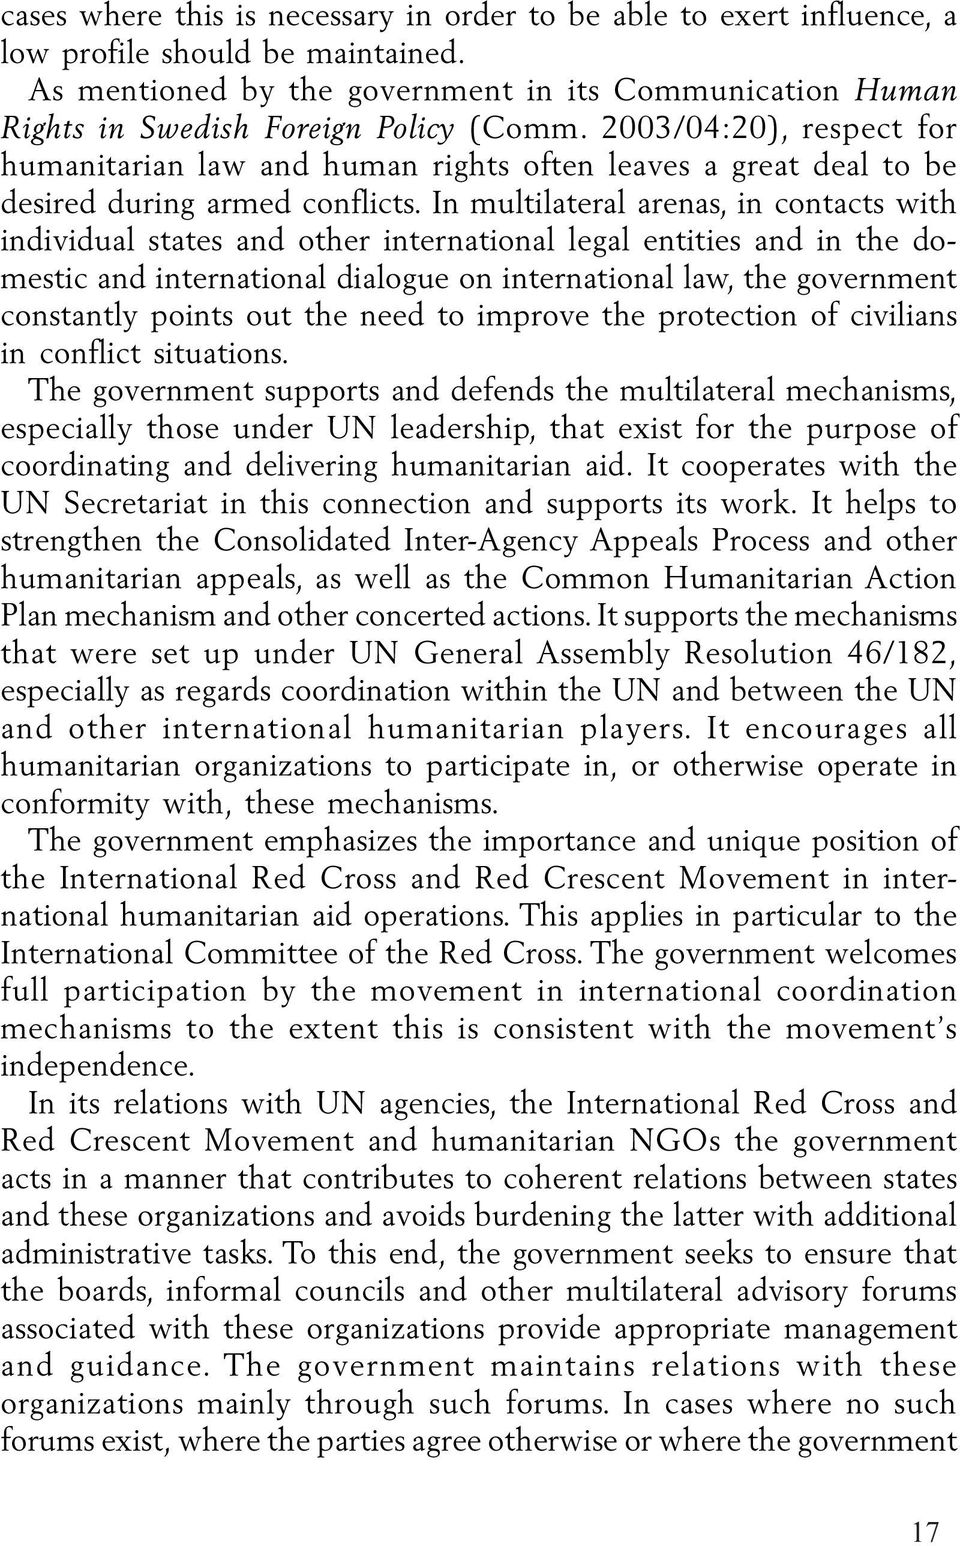 2003/04:20), respect for humanitarian law and human rights often leaves a great deal to be desired during armed conflicts.